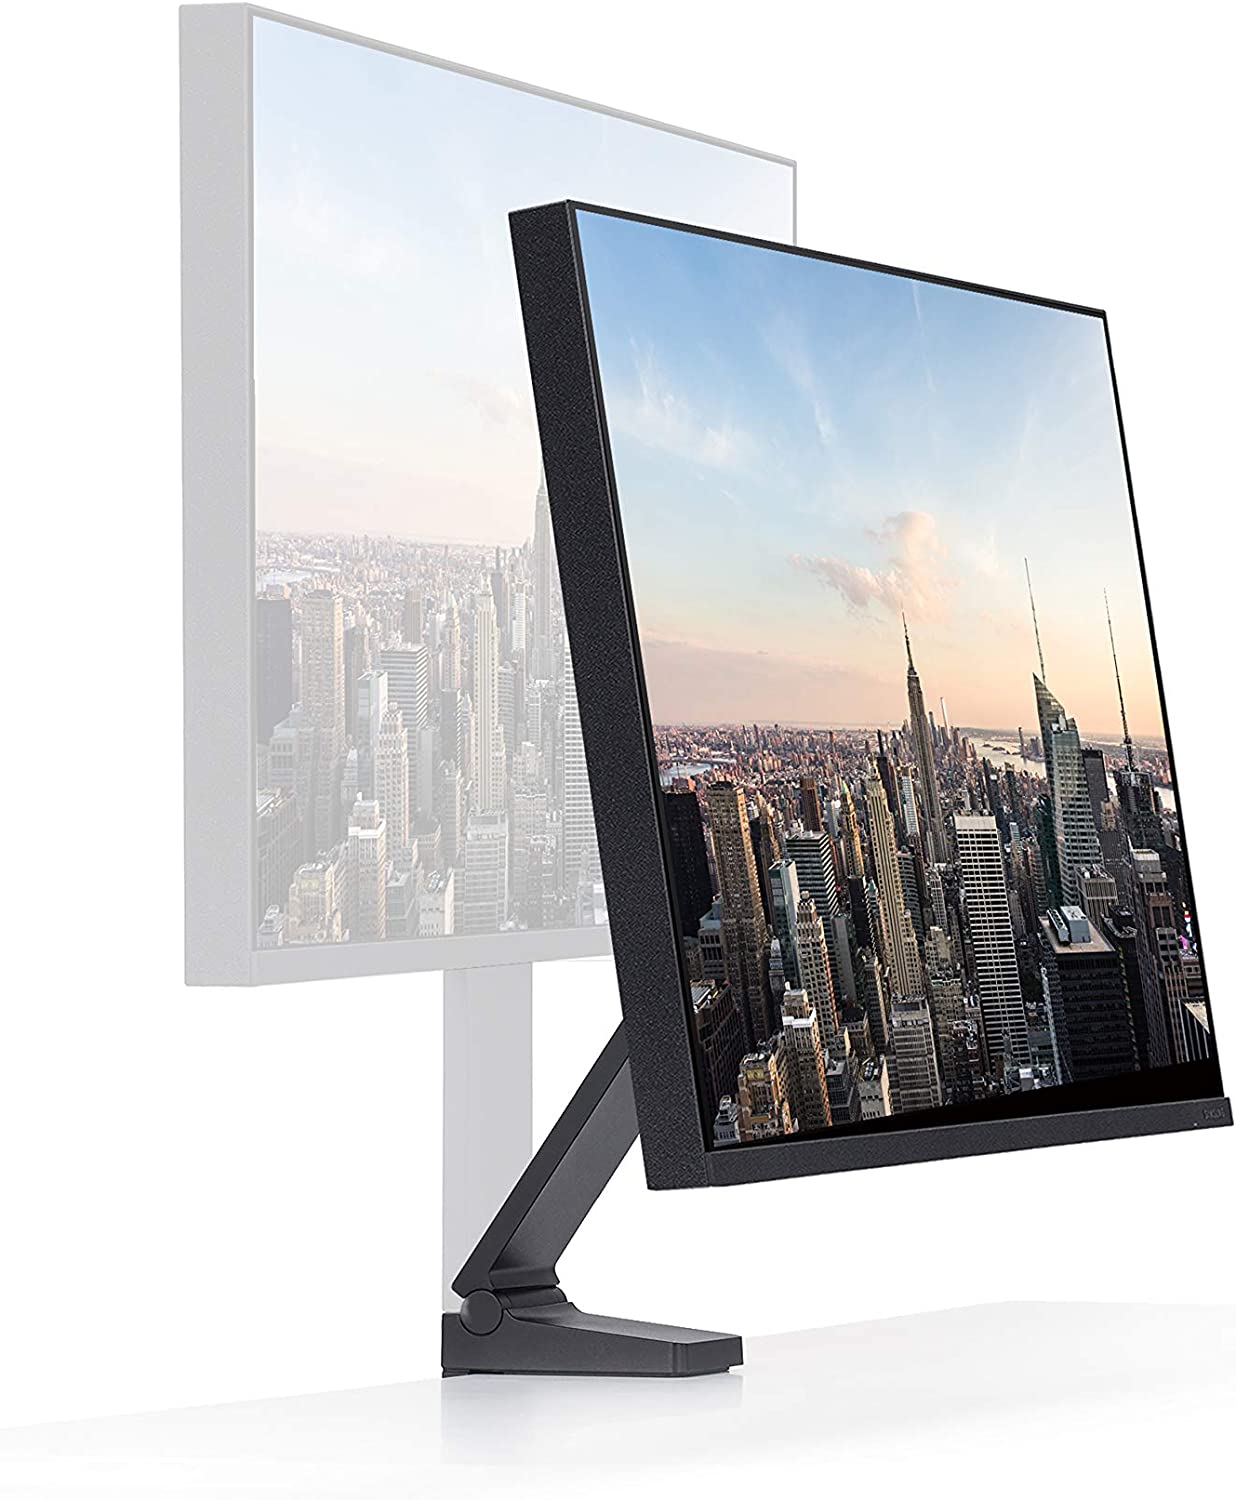 Samsung Flat Space Monitor 27 inch | Gaming Accessories | Halabh.com